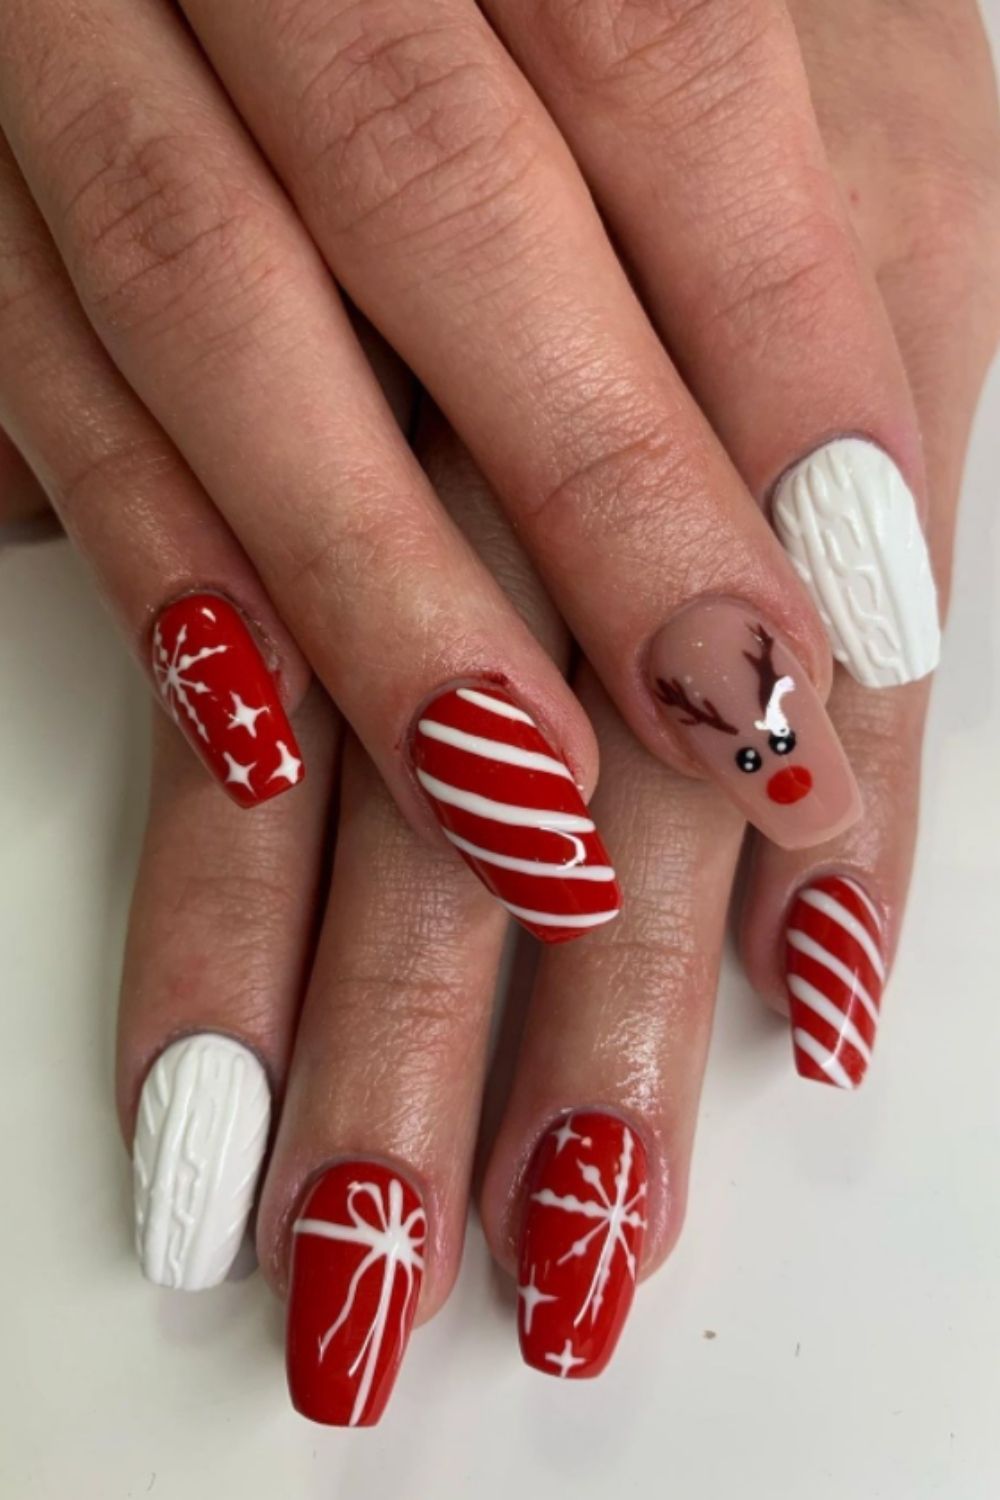 Red and white winter nail designs